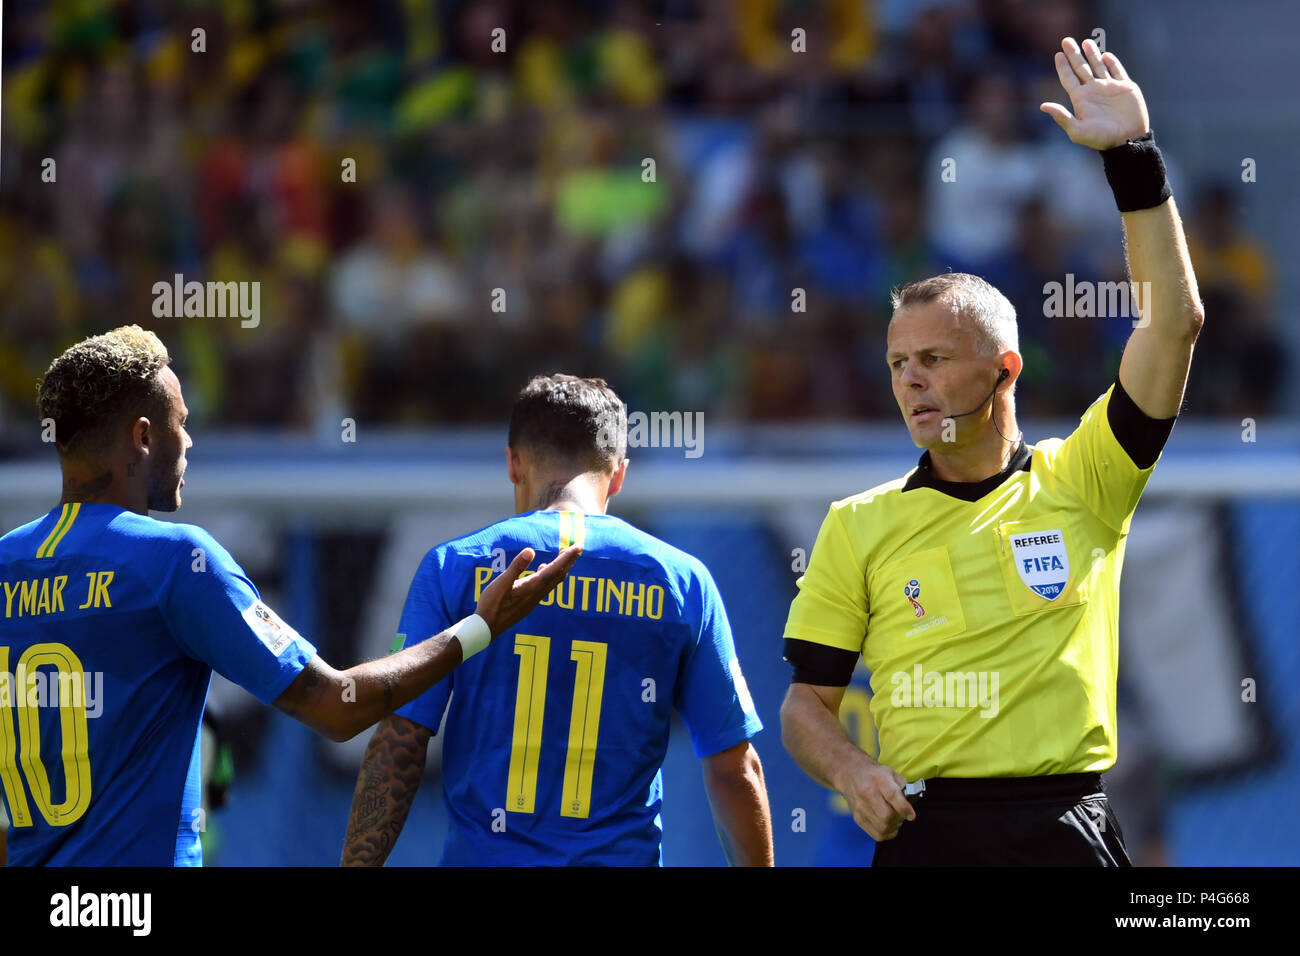 Saint Petersburg, Russia. 22nd June, 2018. Soccer: Preliminary round, Group E, 2nd matchday: Brazil vs Costa Rica in the St. Petersburg Stadium: Brazil's Neymar (L) speaking to match referee Sander van Roekel from the Netherlands while Brazil's Philippe Coutinho passes by. Credit: Federico Gambarini/dpa/Alamy Live News Stock Photo